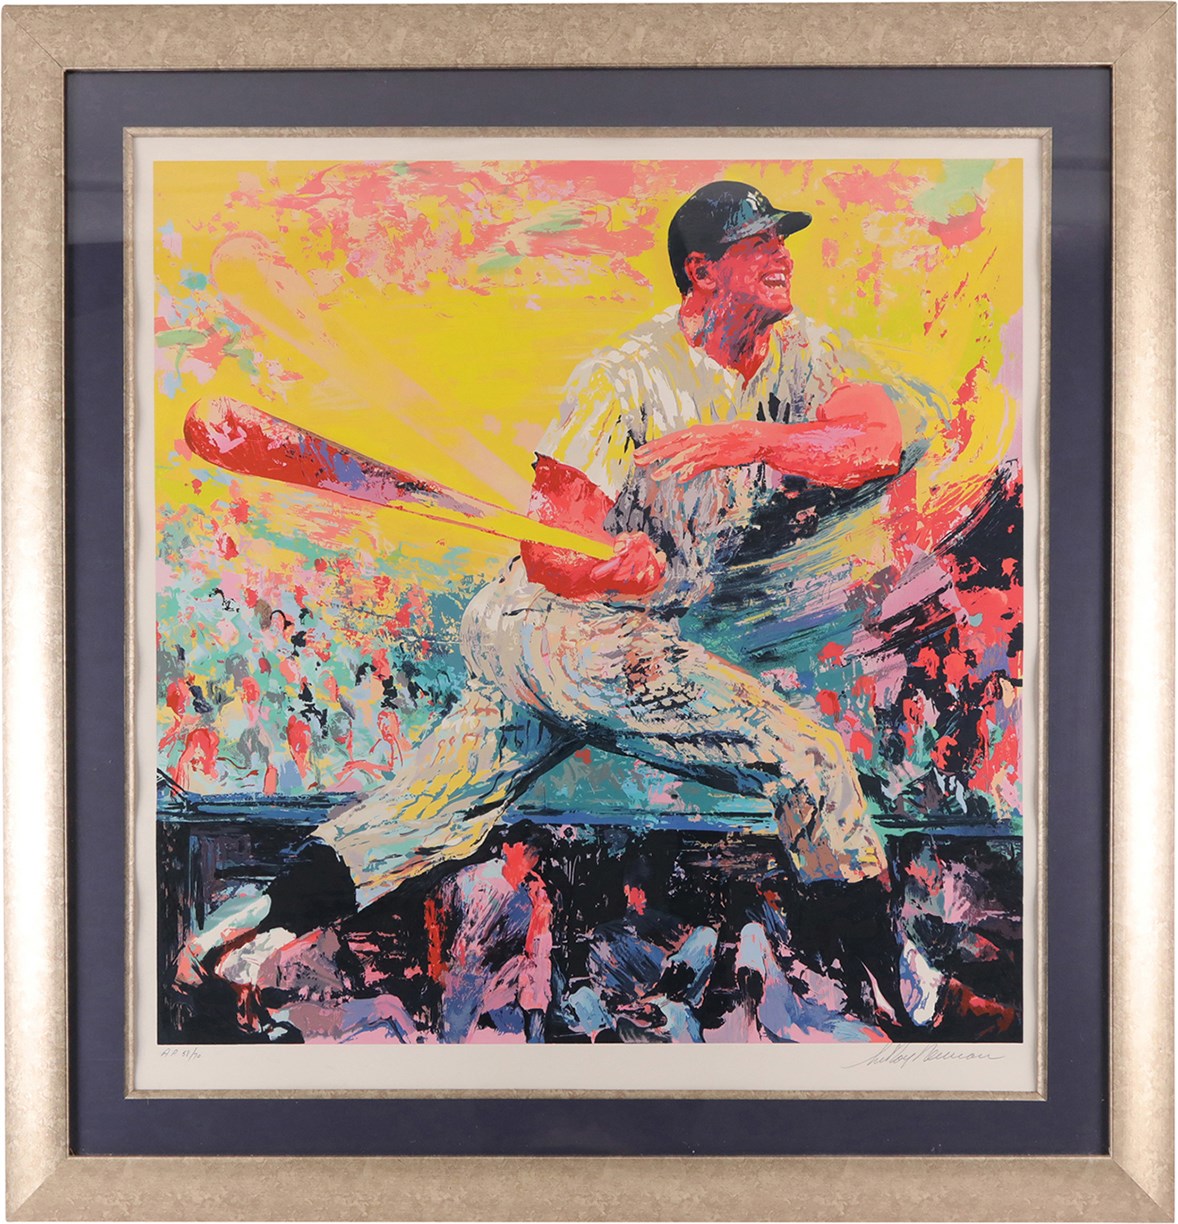 Mantle and Maris - 1999 Mickey Mantle LeRoy Neiman Signed Artist Proof Serigraph - AP 58/70